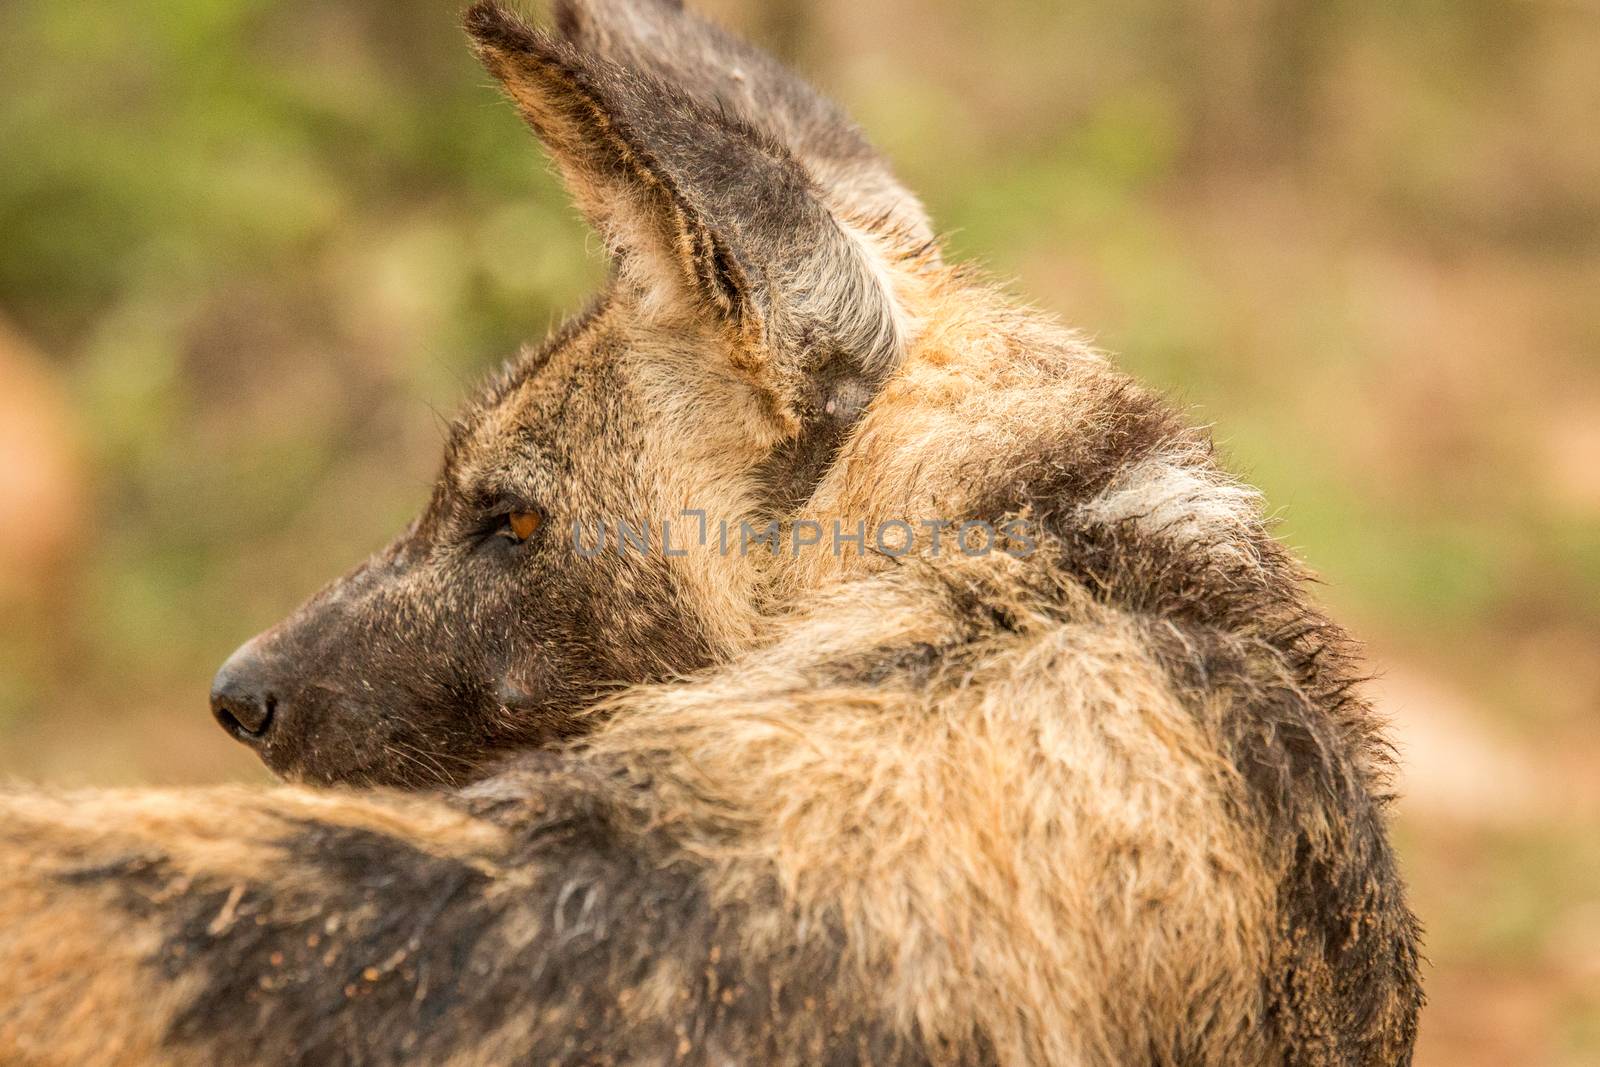 Starring African wild dog from behind in the Kruger National Park, South Africa.